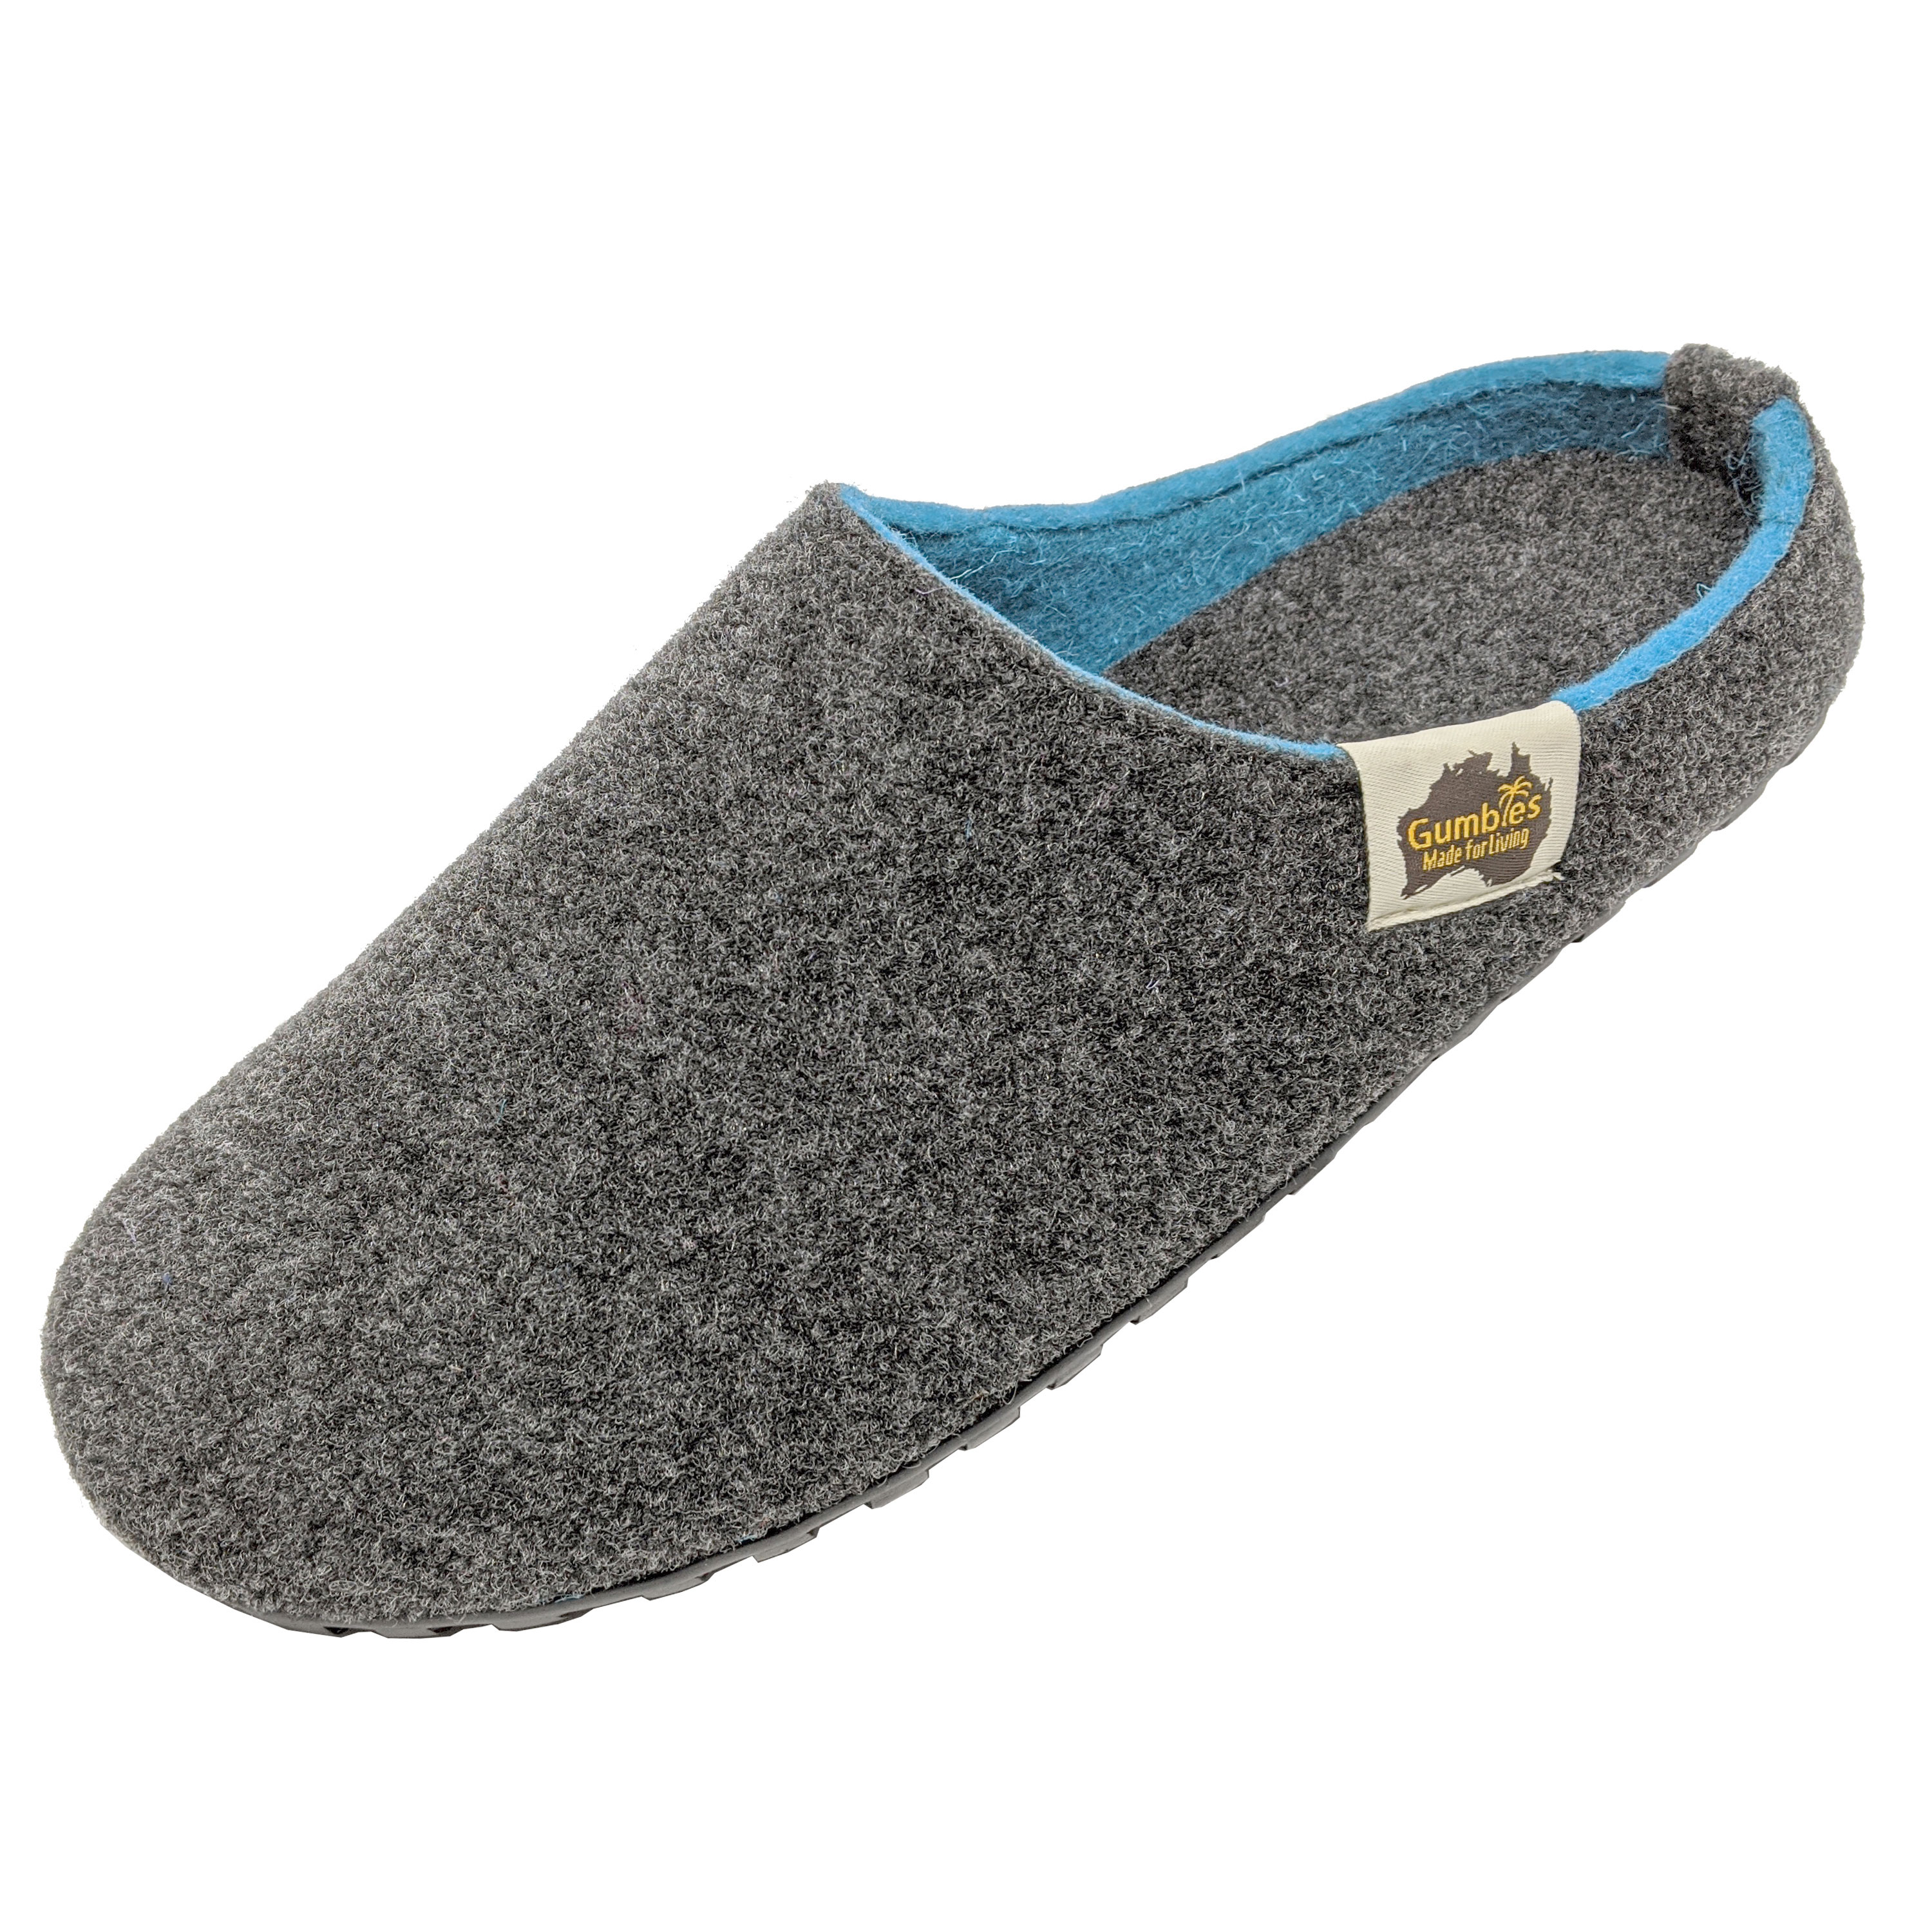 GUMBIES – Outback Slipper, Charcoal Turquoise 